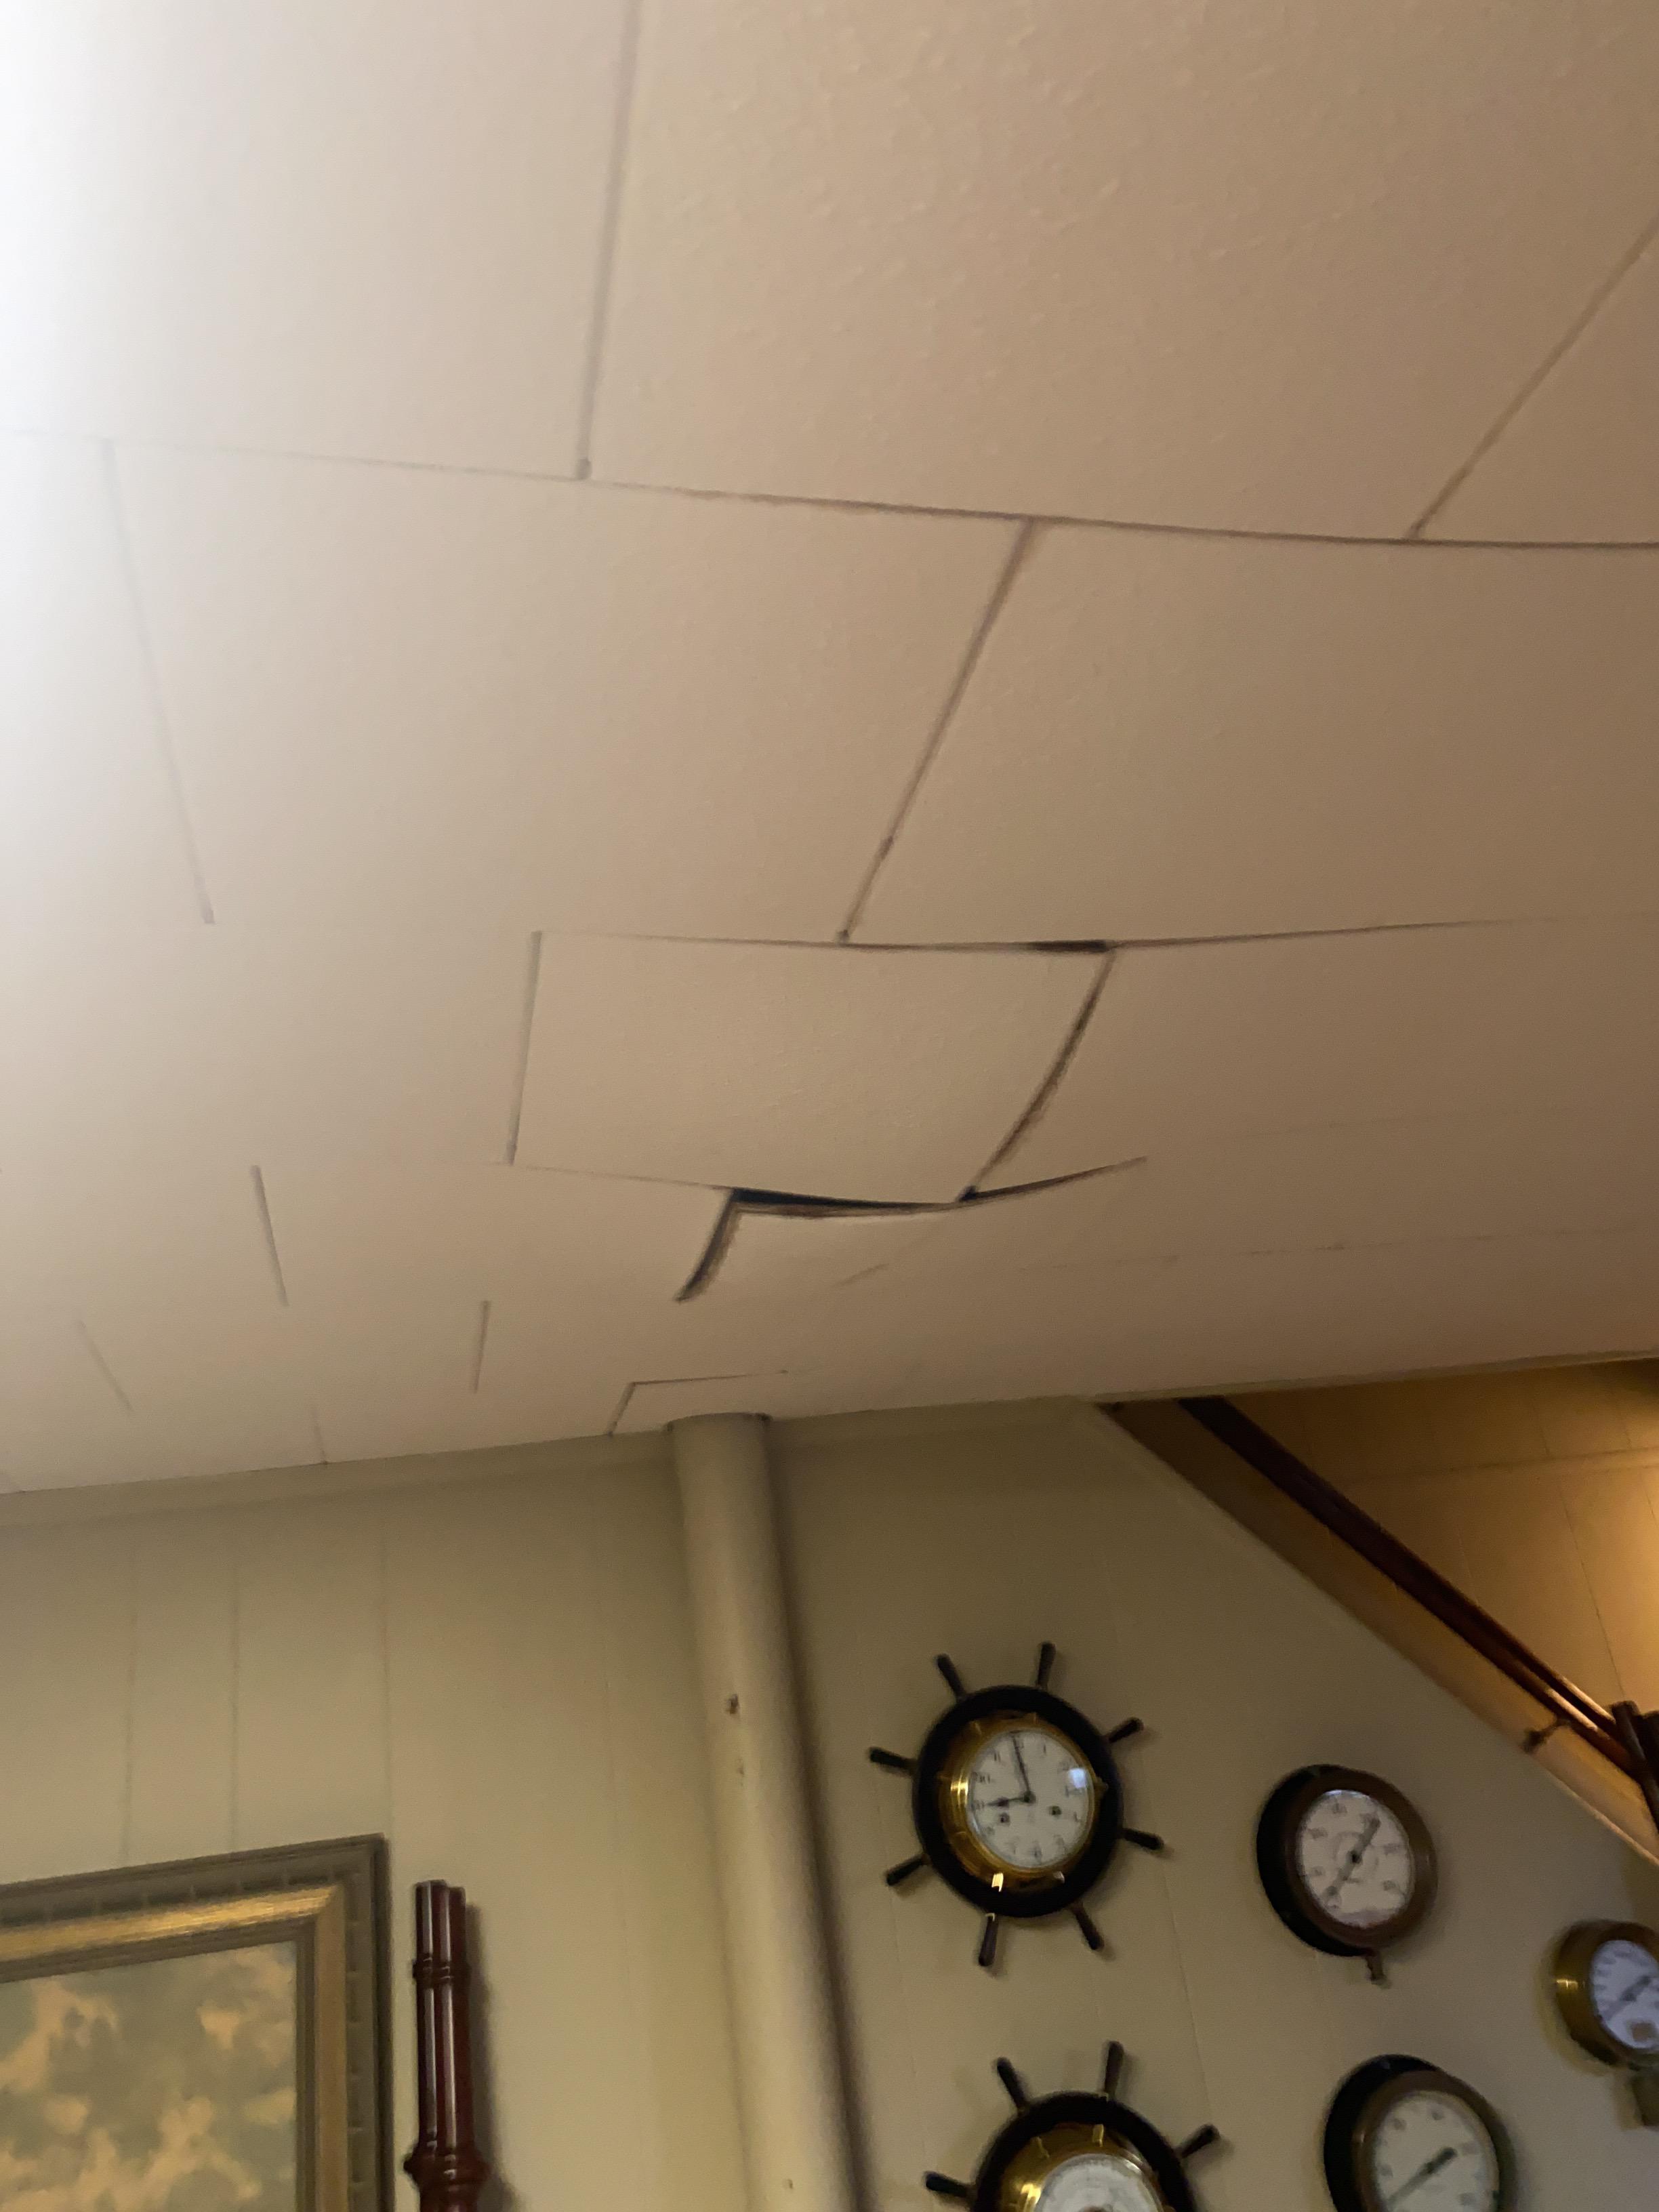 Ceiling tiles damaged from Steam